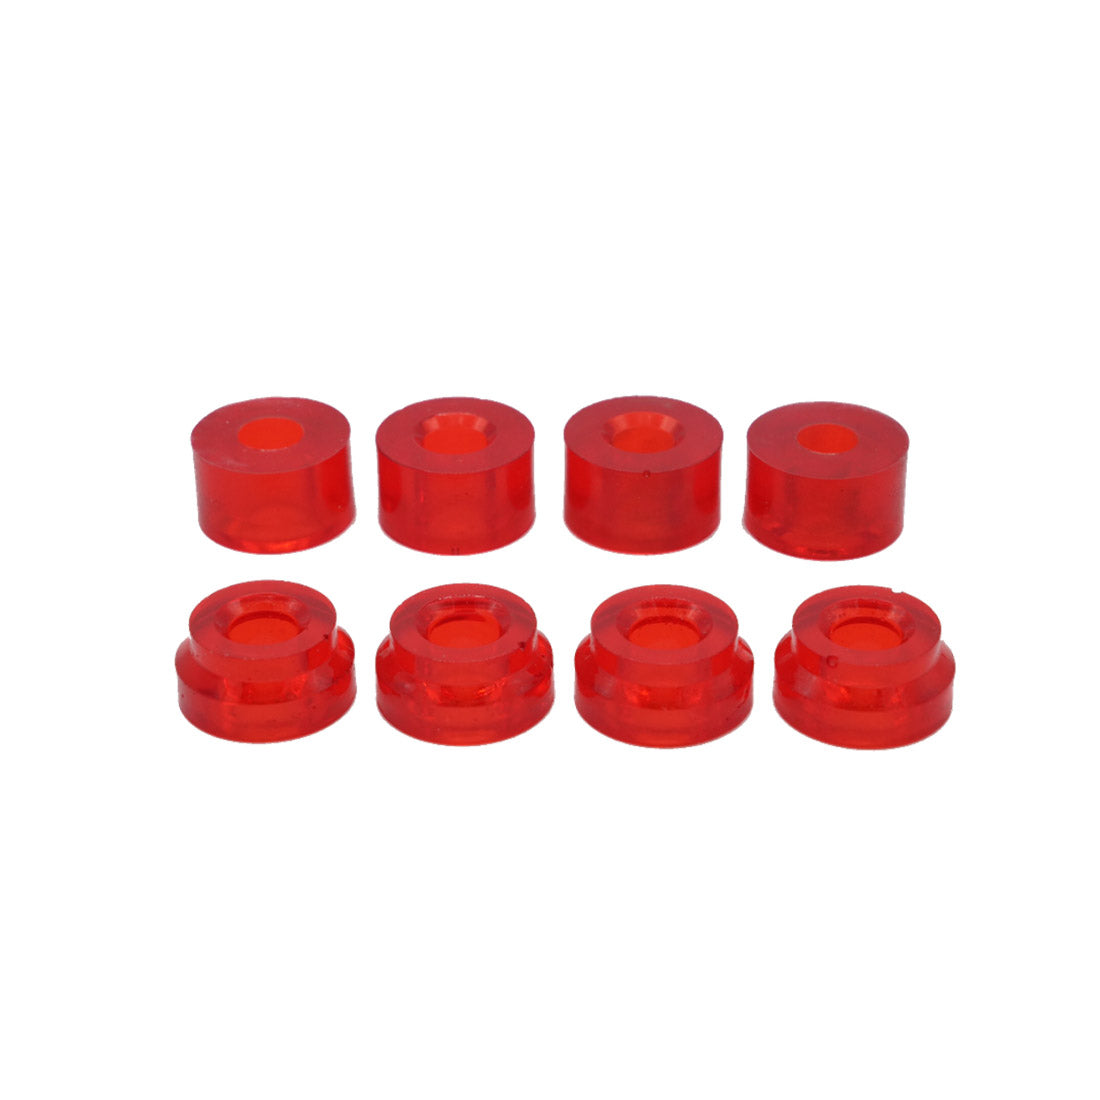 Powerdyne Magic Cushions - Reactor 8pk Red 78a Soft Roller Skate Hardware and Parts